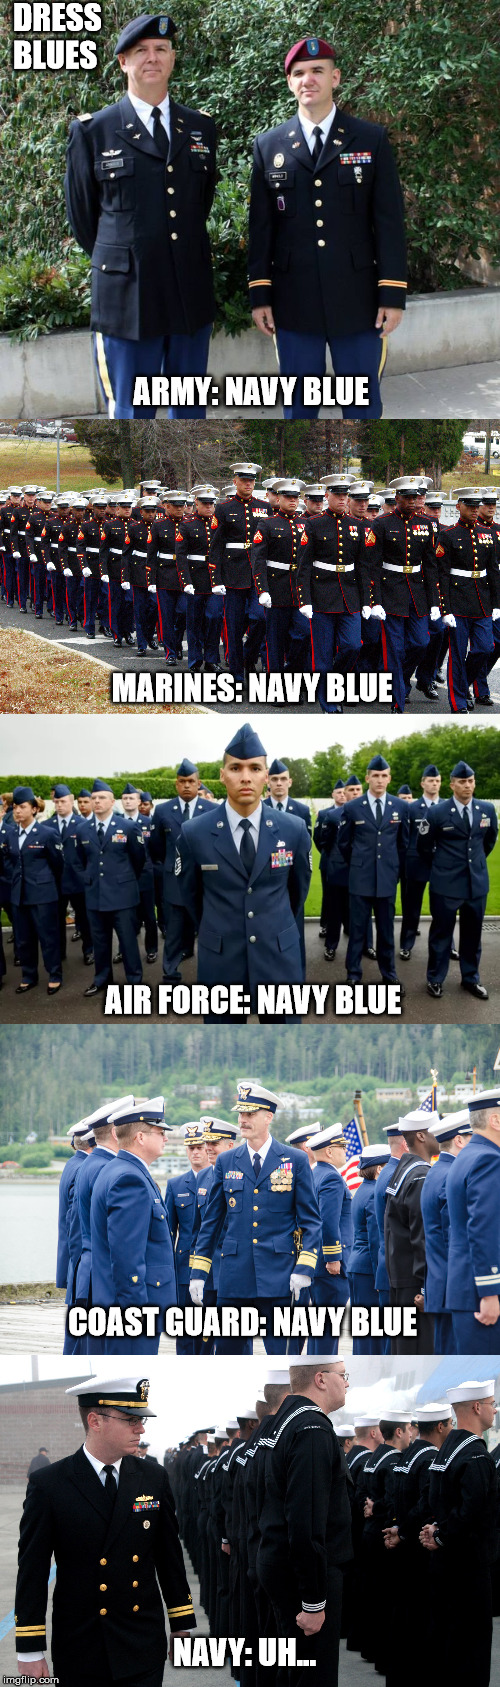 "Navy" blue | DRESS BLUES; ARMY: NAVY BLUE; MARINES: NAVY BLUE; AIR FORCE: NAVY BLUE; COAST GUARD: NAVY BLUE; NAVY: UH... | image tagged in military humor | made w/ Imgflip meme maker